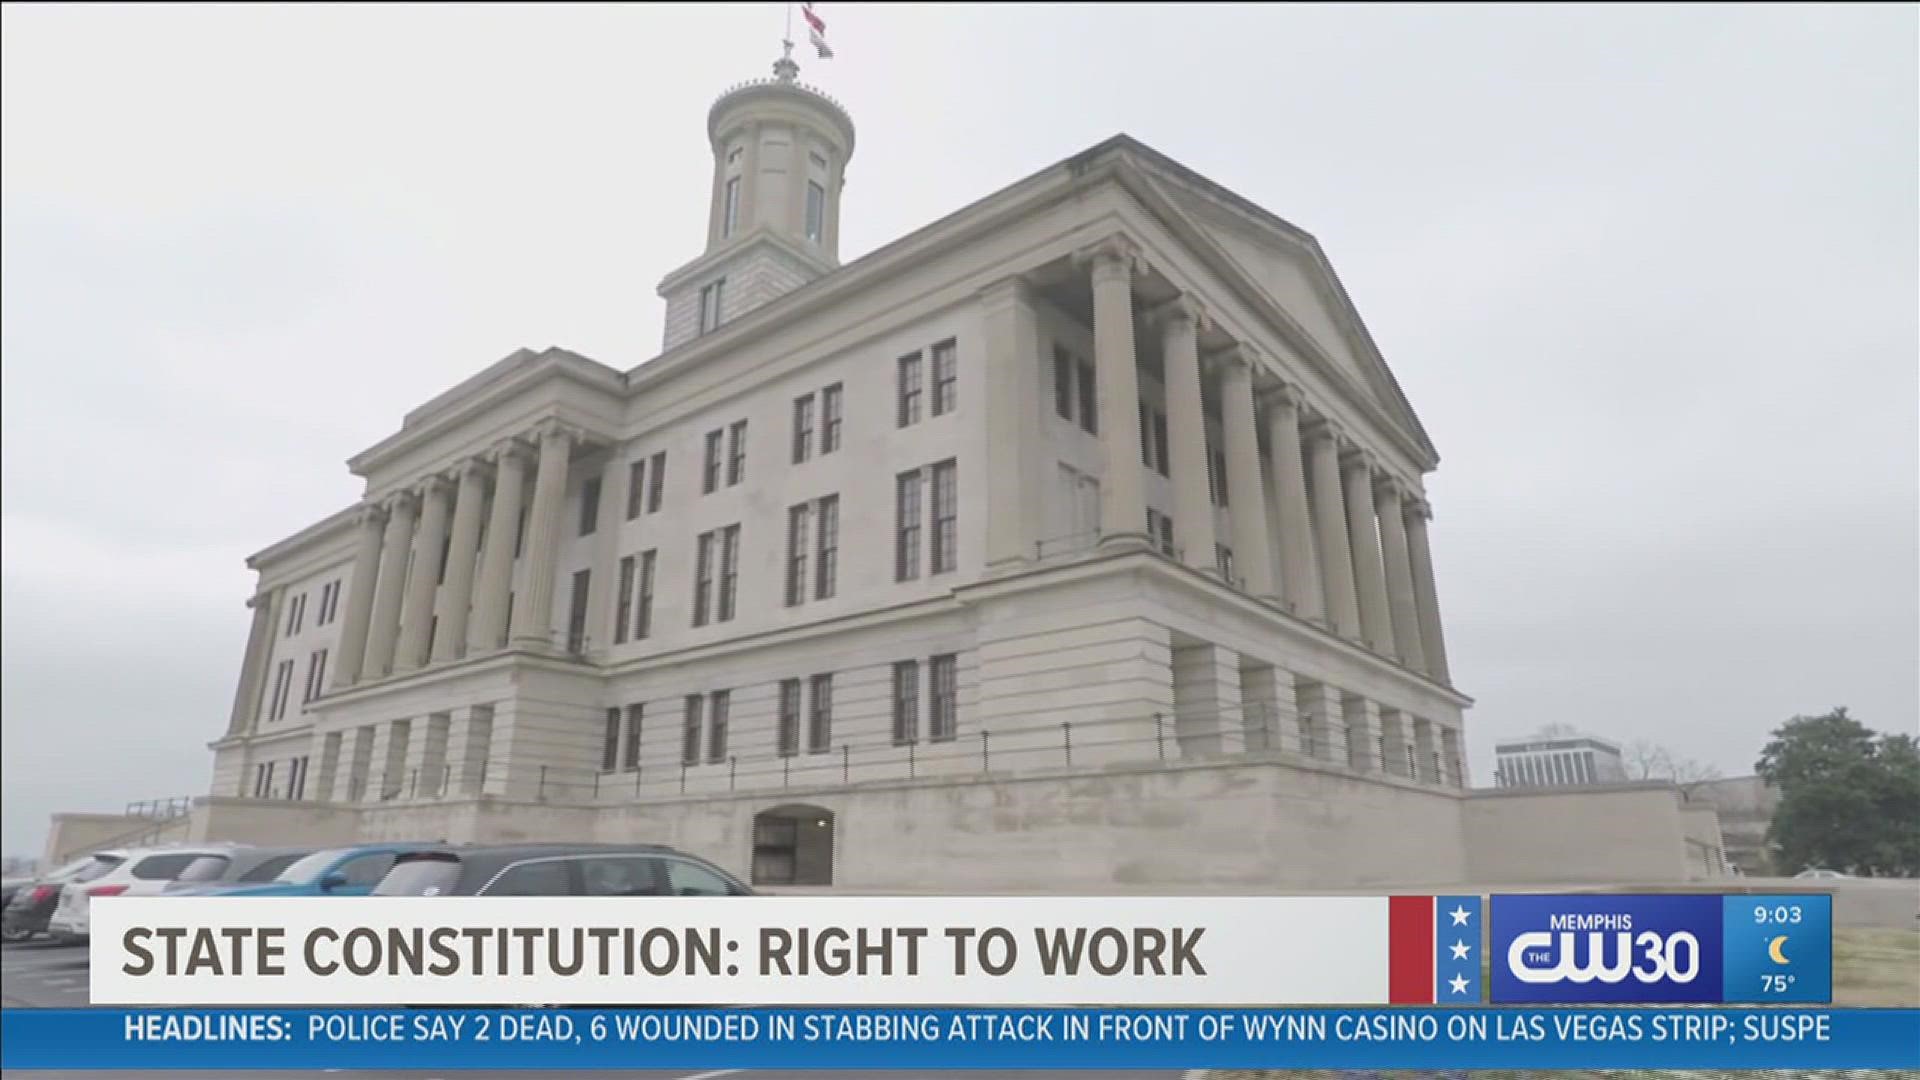 The amendment would basically add Tennessee’s ‘Right to Work’ law to the state Constitution.